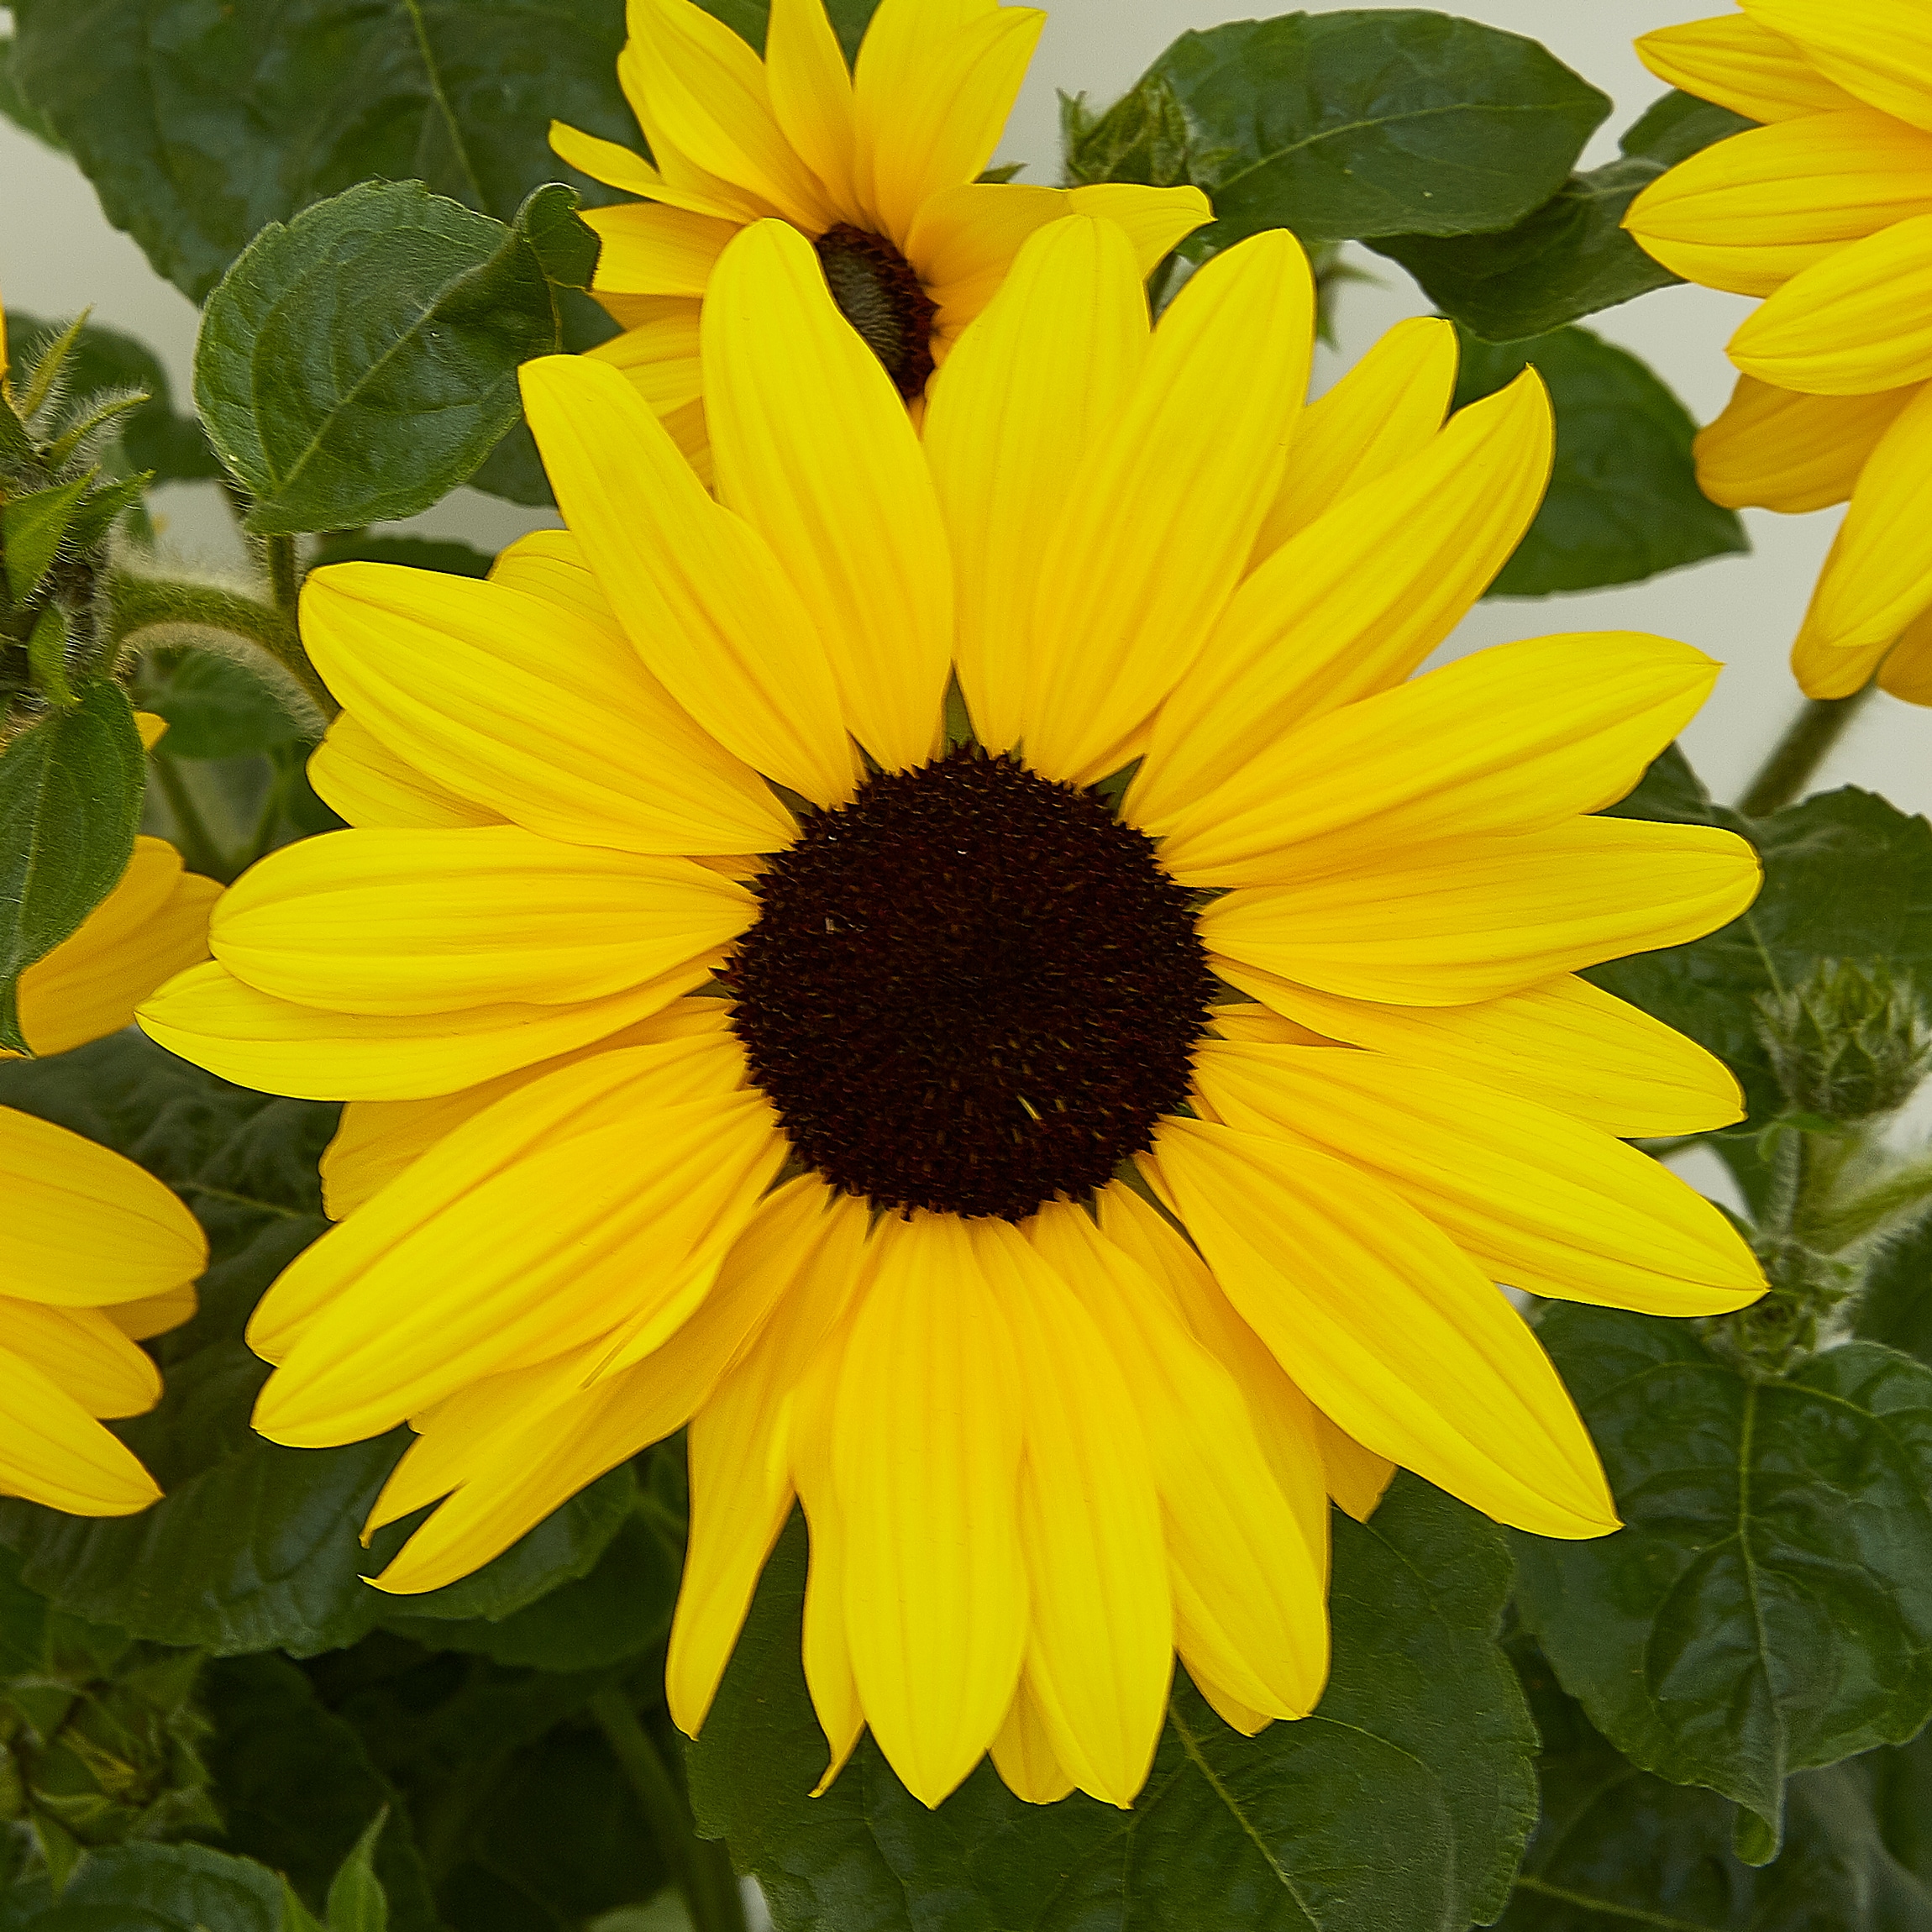 Metrolina Greenhouses Yellow Sunflower in 3-Quart Planter 2-Pack in the ...